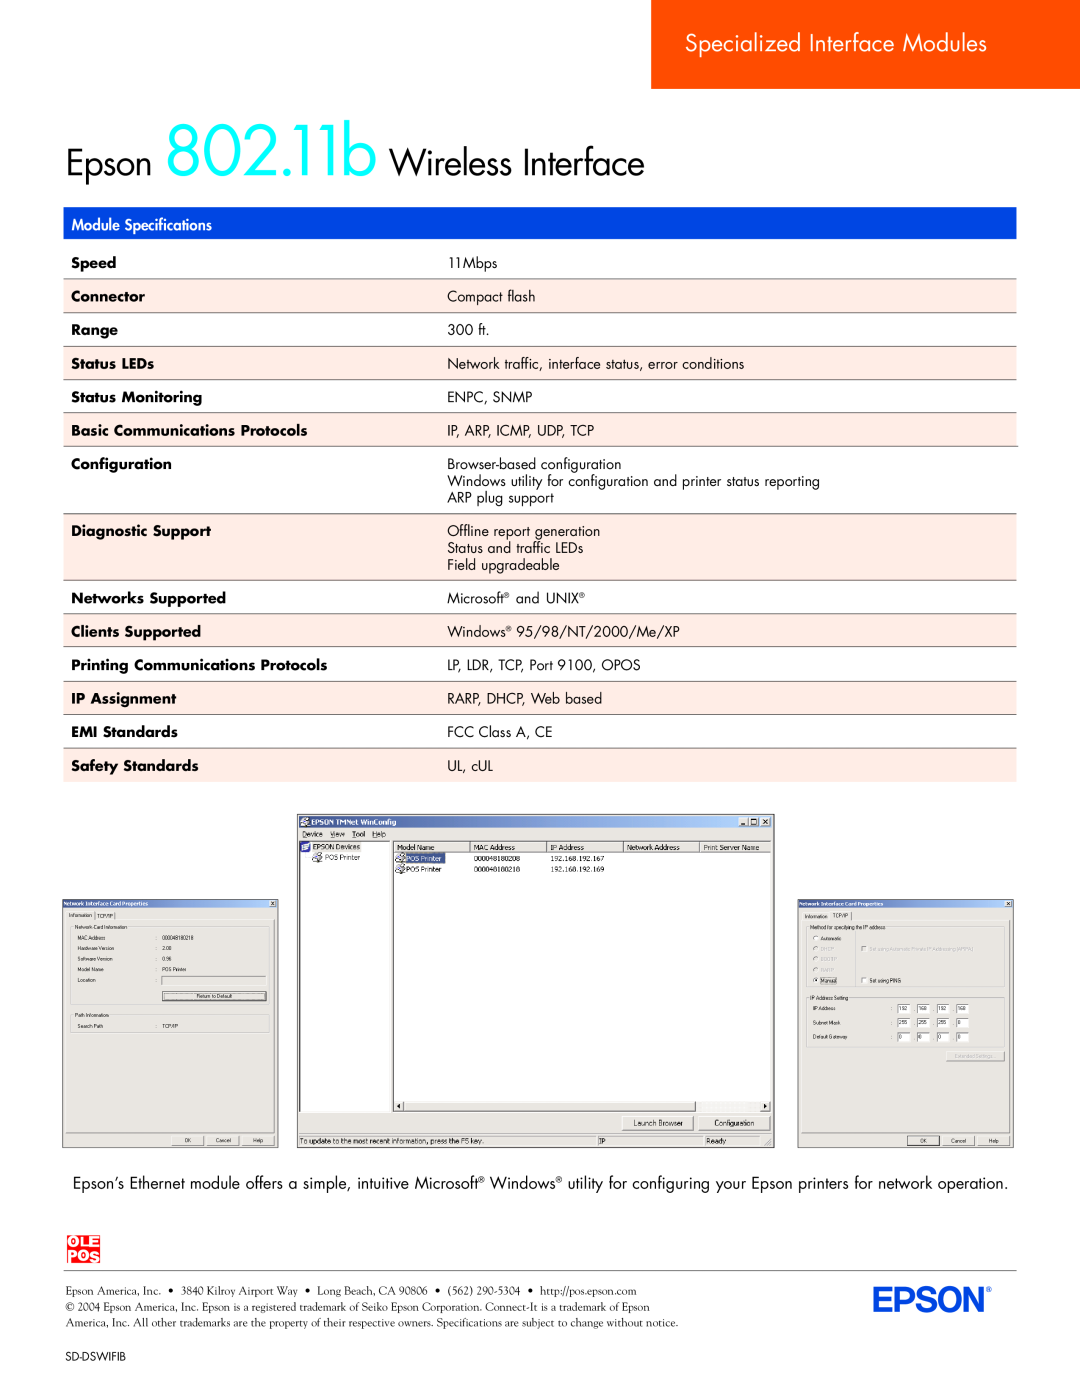 Epson SD-DSWIFIB manual Epson 802.11b Wireless Interface, Specialized Interface Modules, Module Specifications 